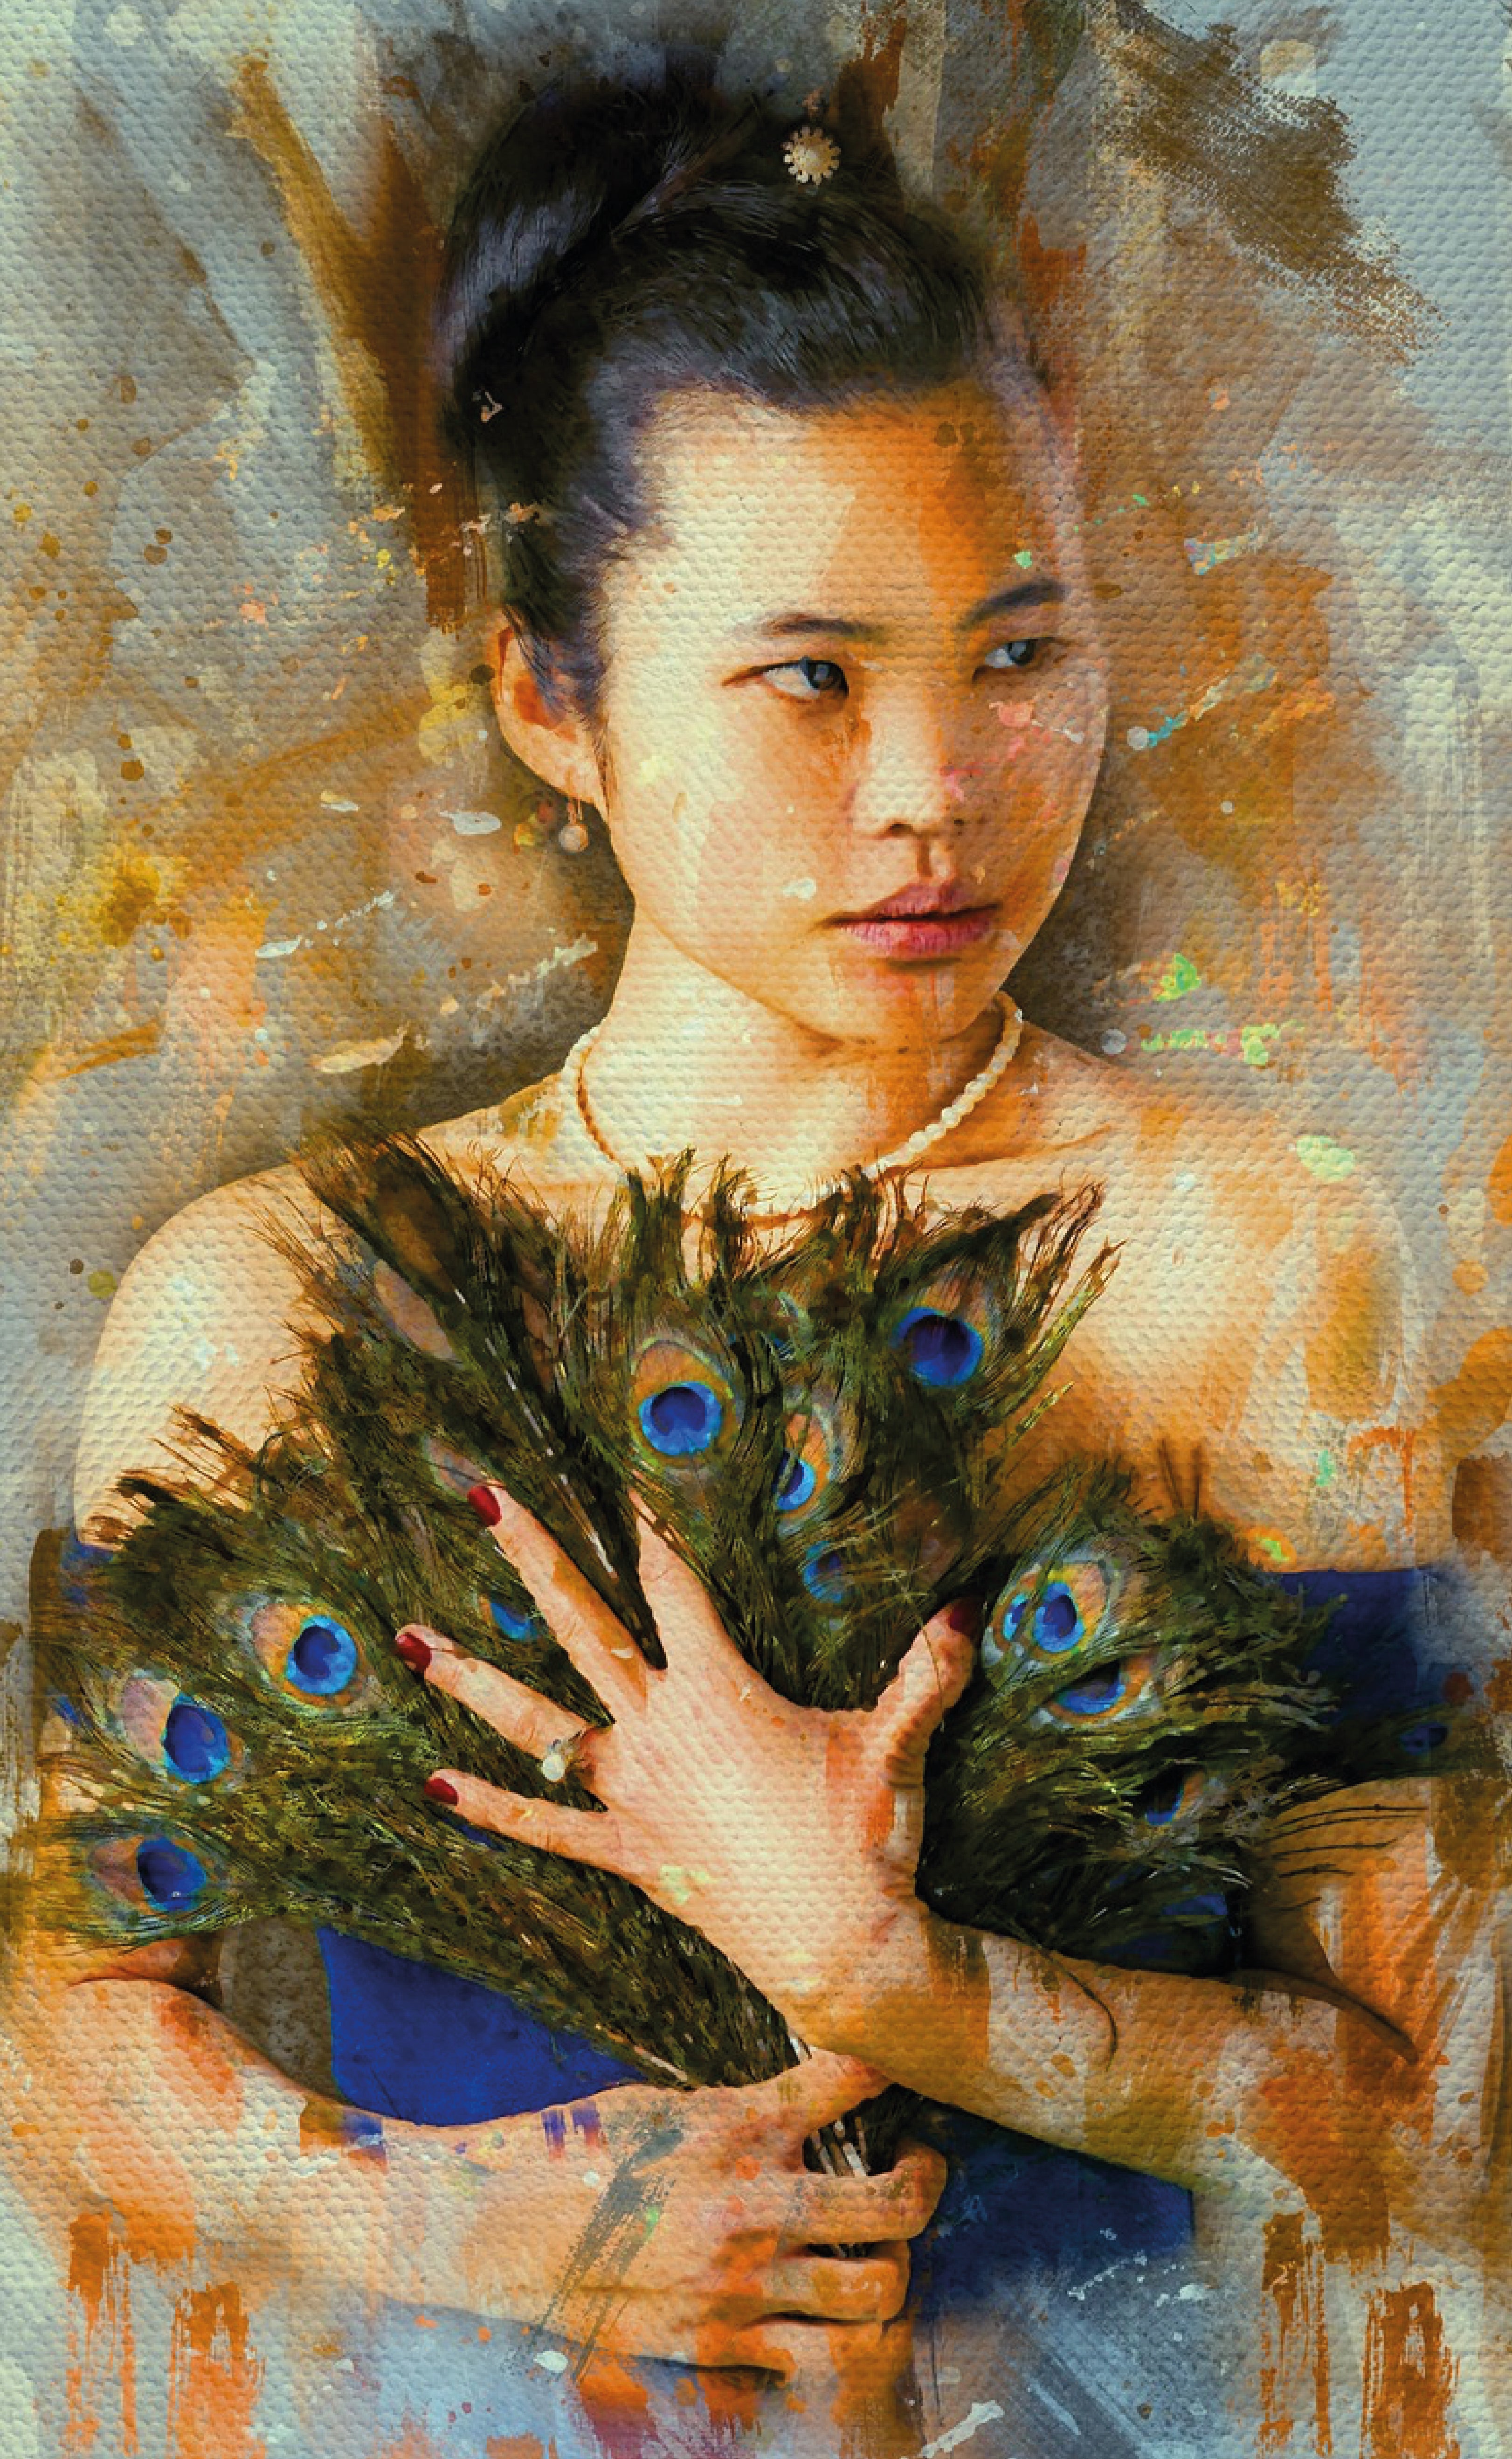 ASIAN WOMAN WITH FEATHERS